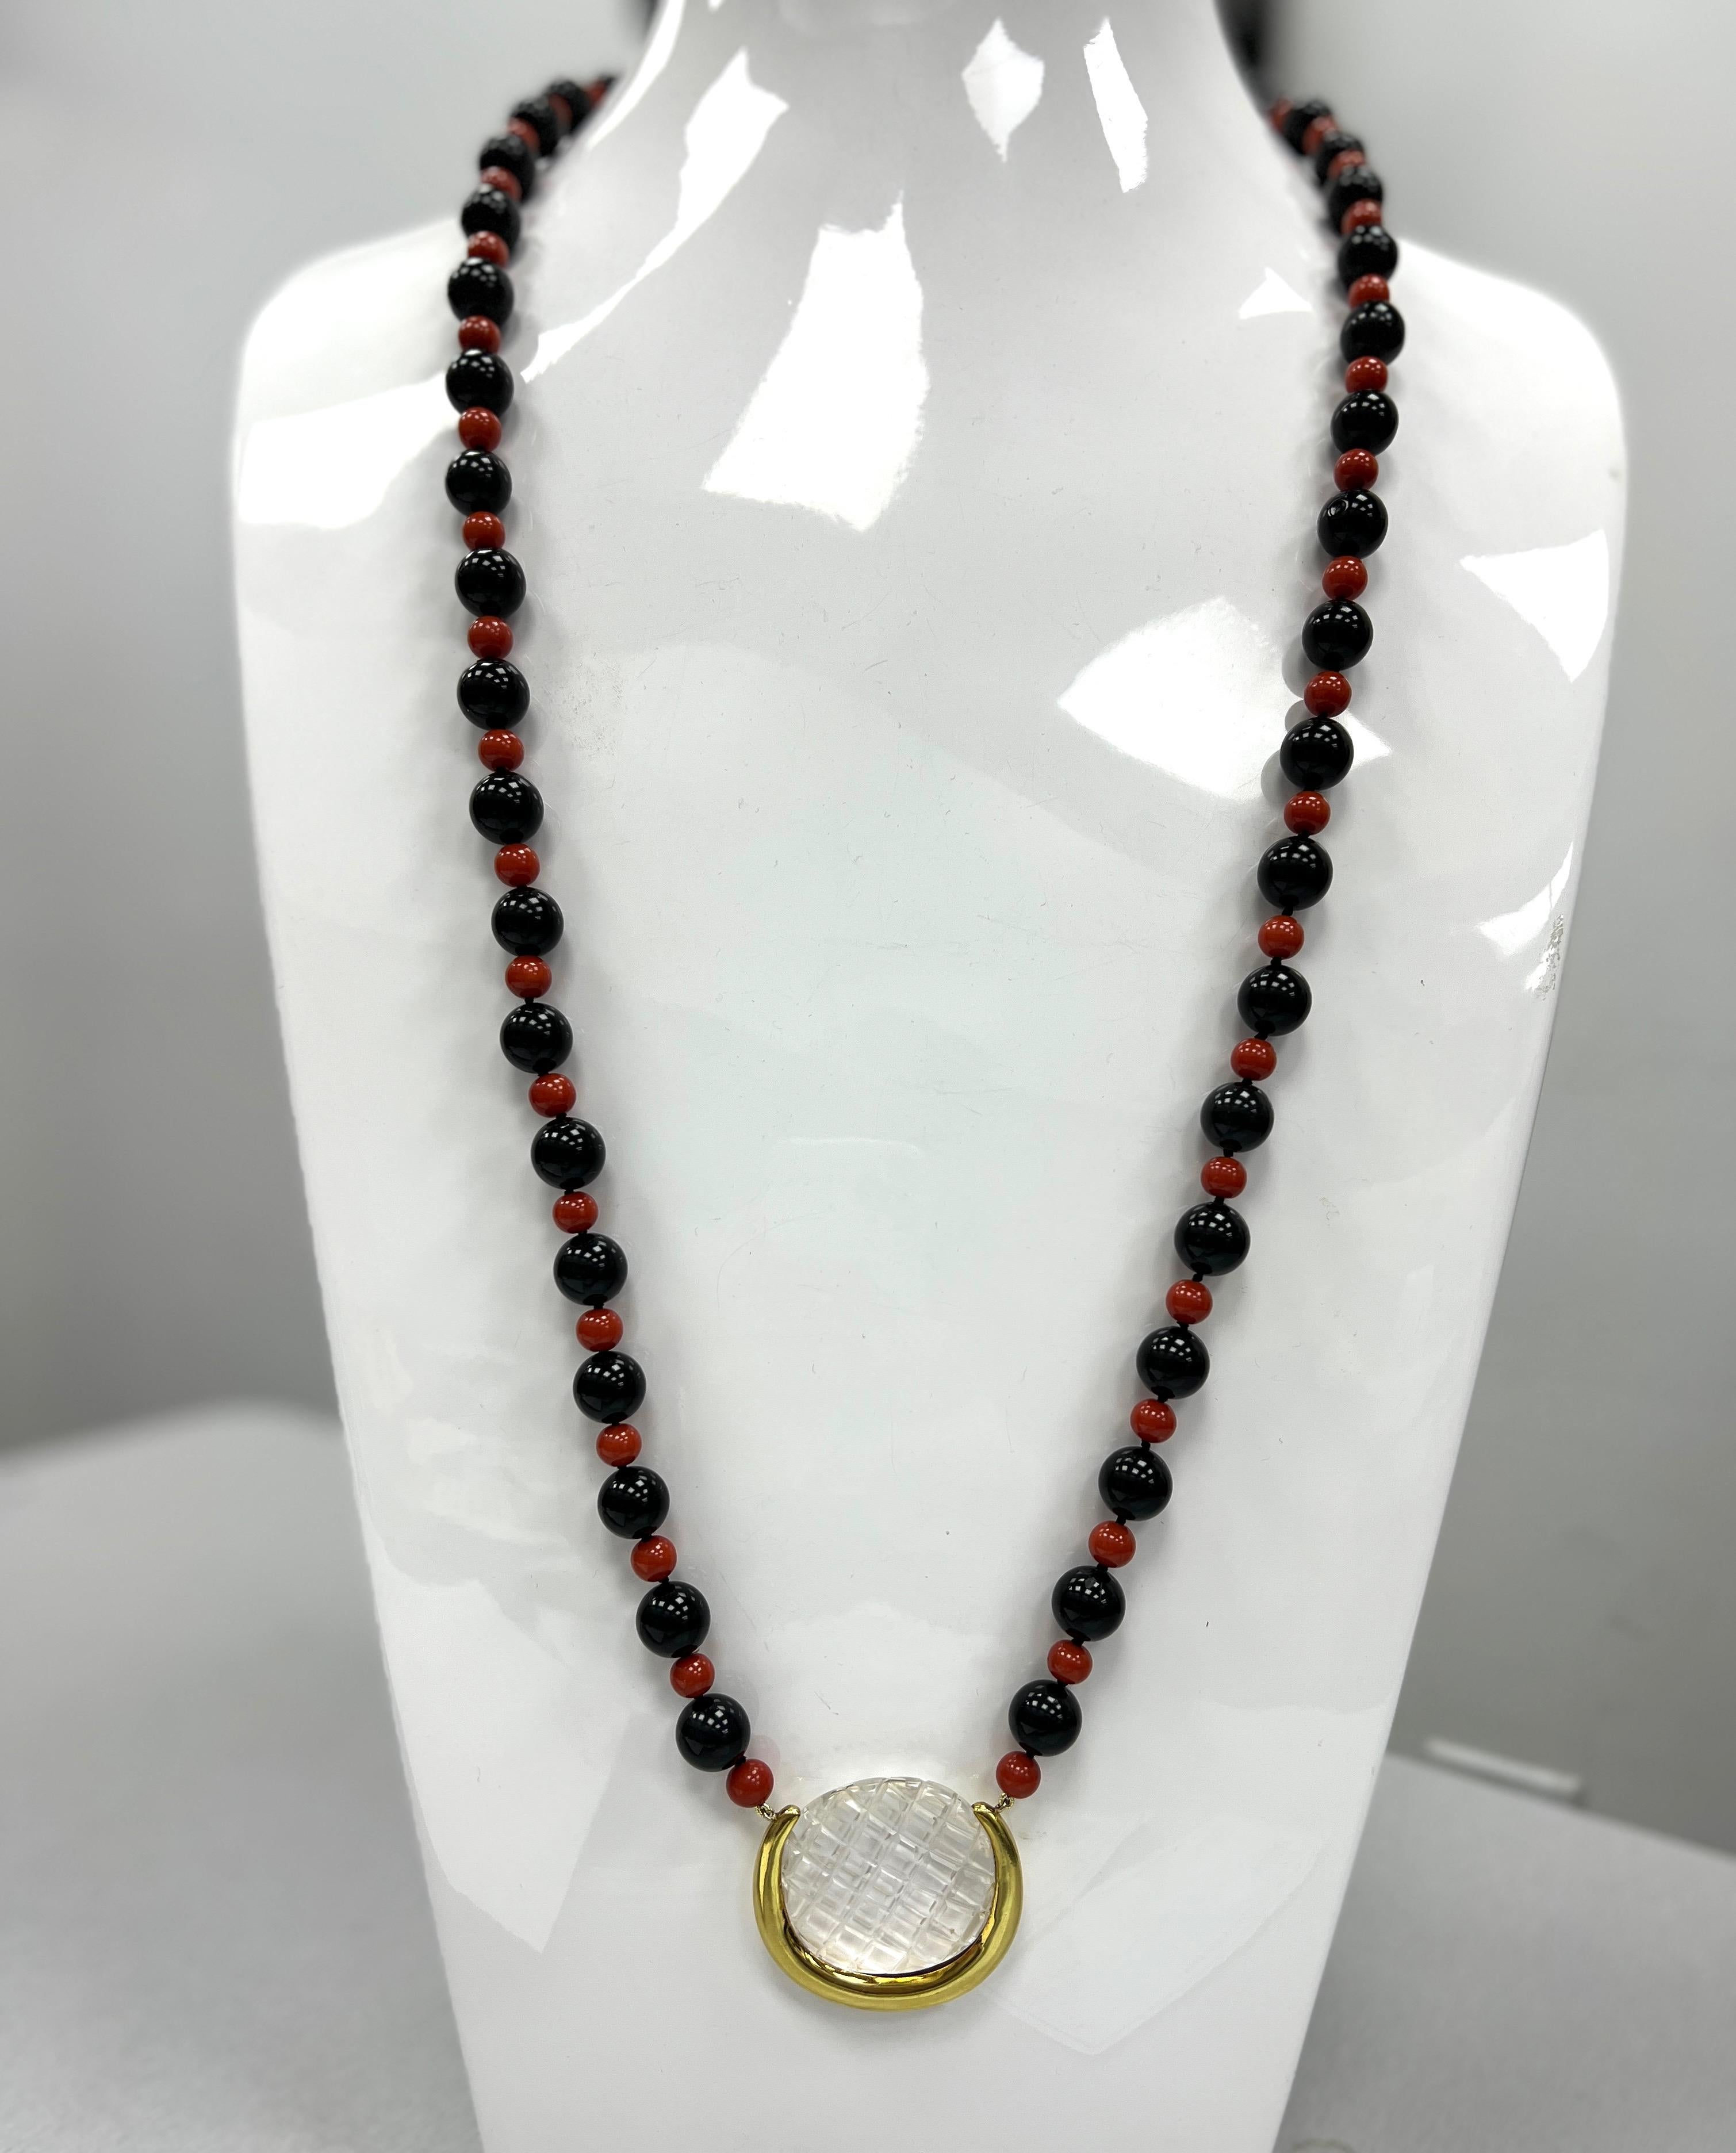 Aldo Cipullo Gold Crystal Pendant with Black Onyx and Coral Necklace 1